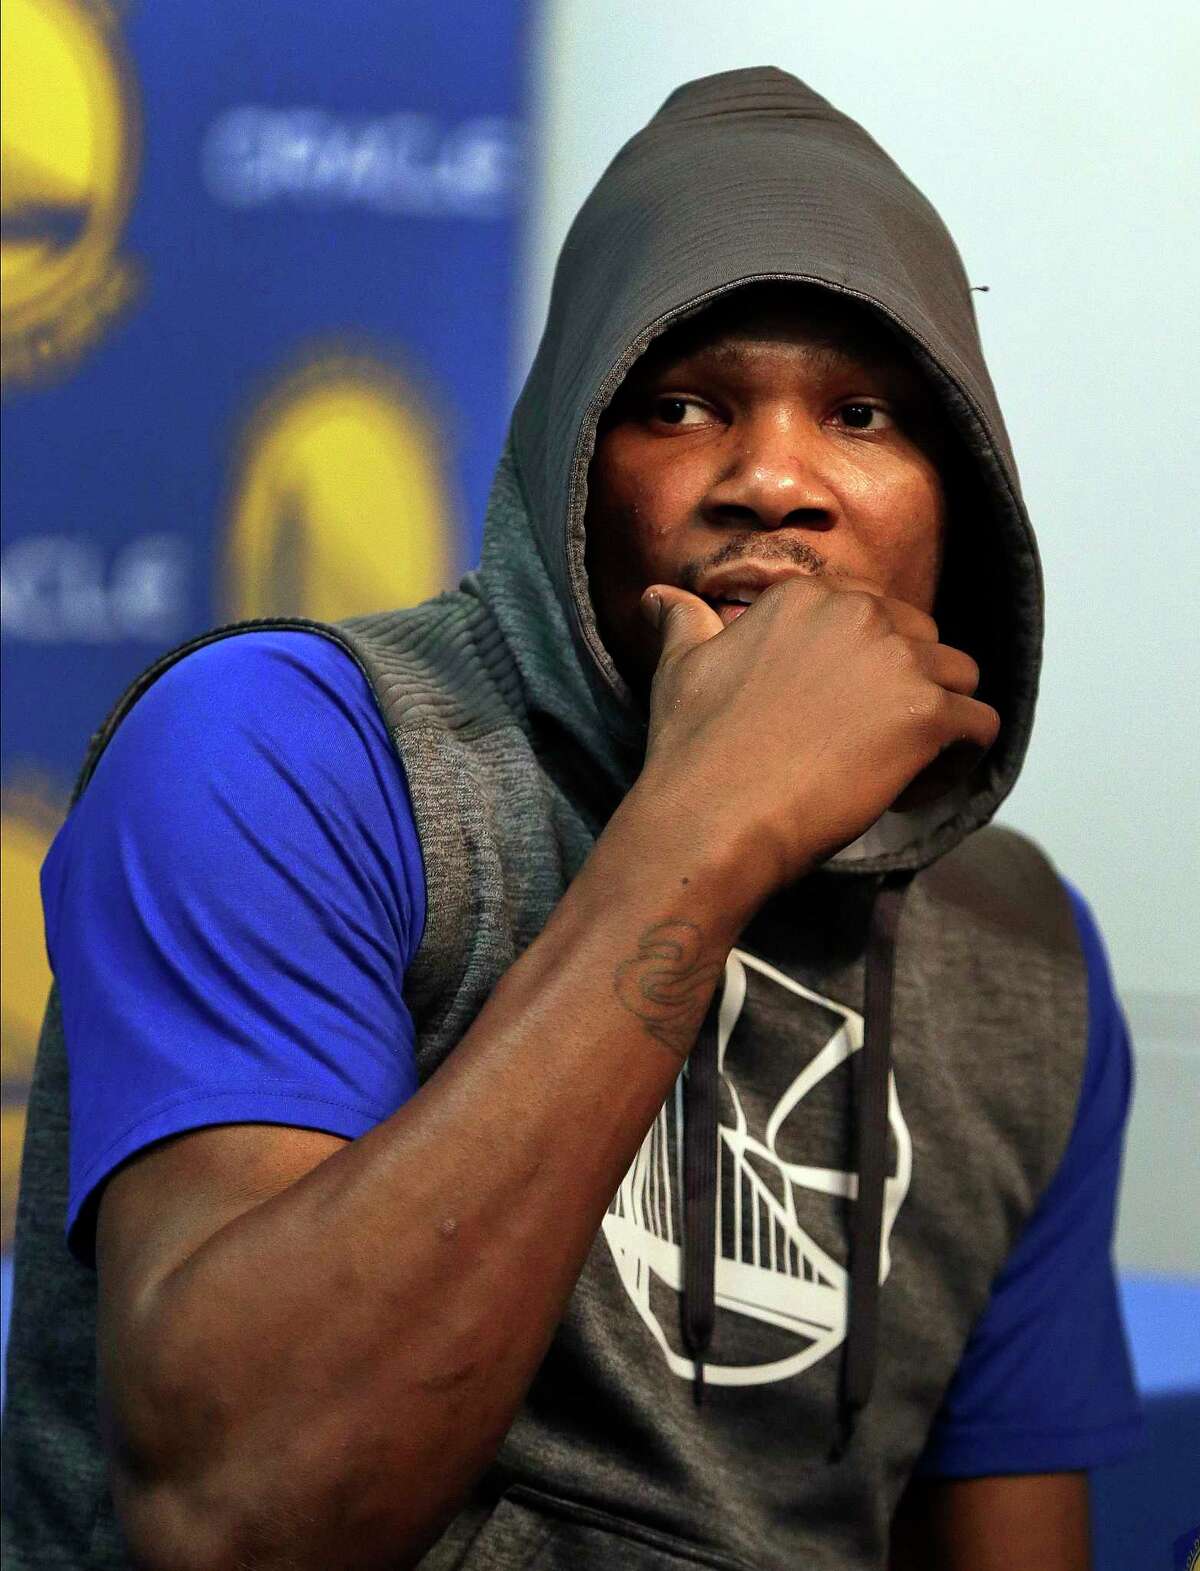 Golden State Warriors' Kevin Durant during answers questions during a news conference prior to the team's NBA basketball game against the Boston Celtics on Wednesday, March 8, 2017, in Oakland, Calif. (AP Photo/Ben Margot)